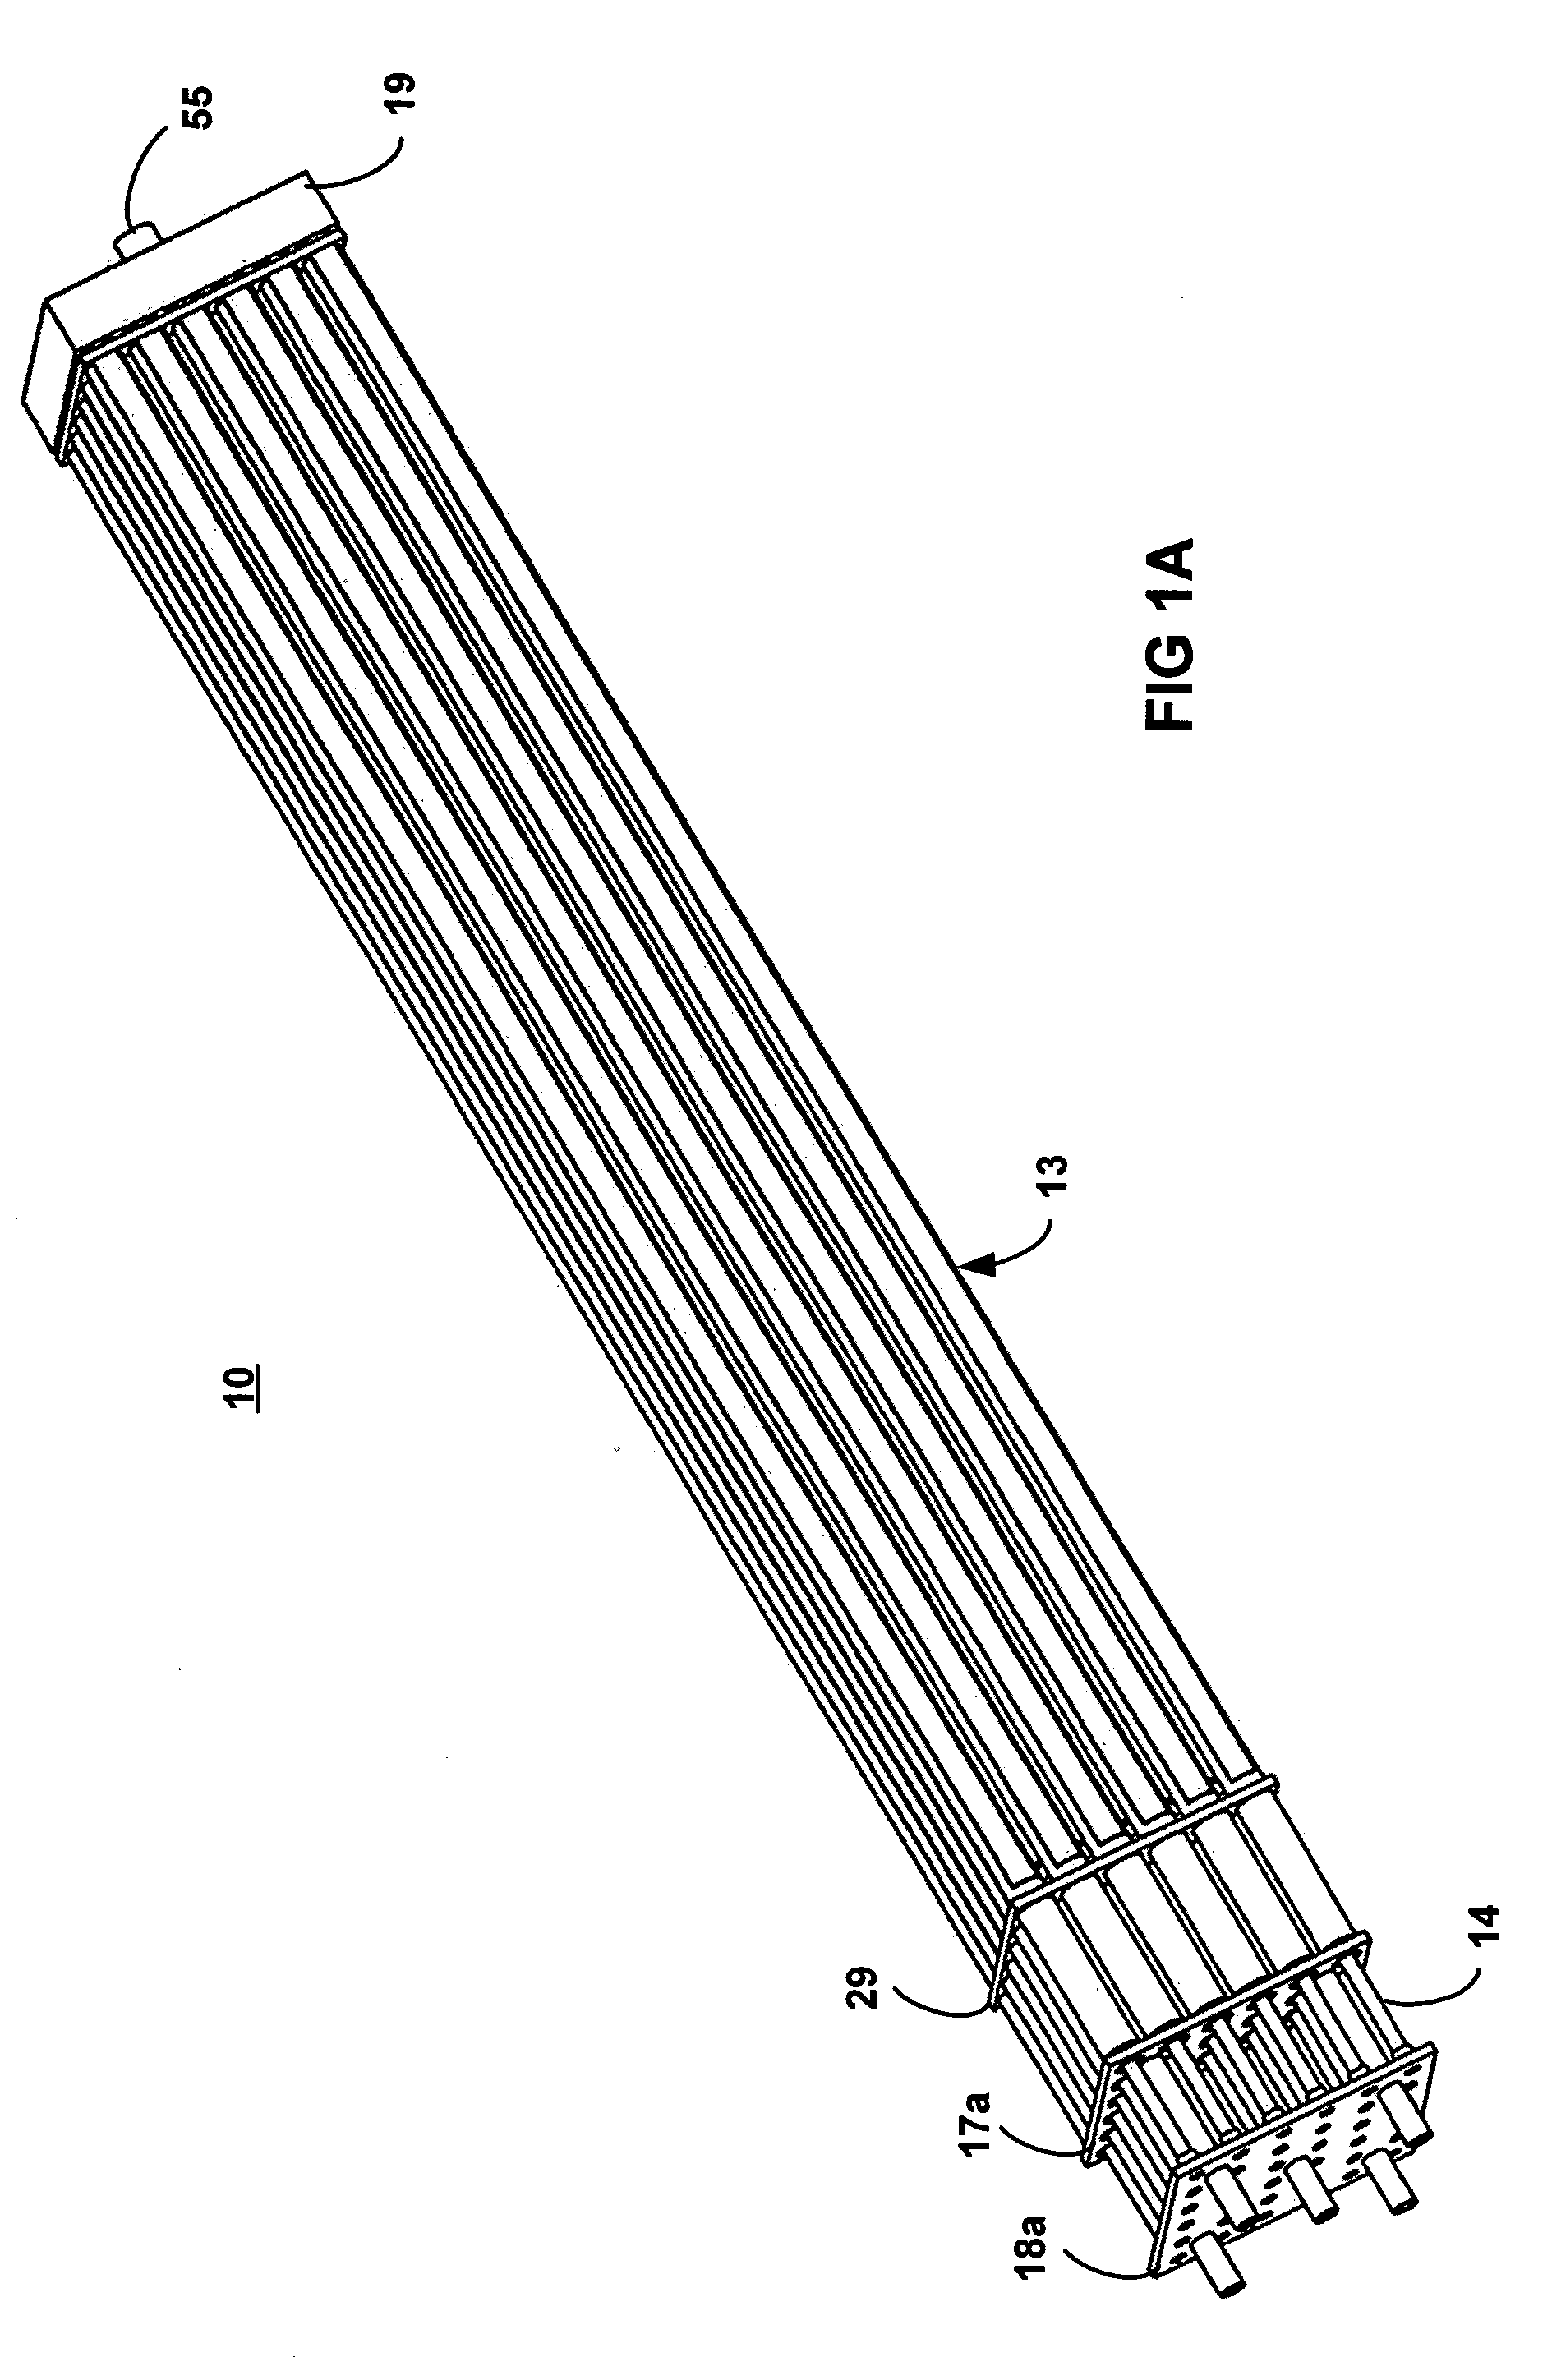 Multi-function solid oxide fuel cell bundle and method of making the same